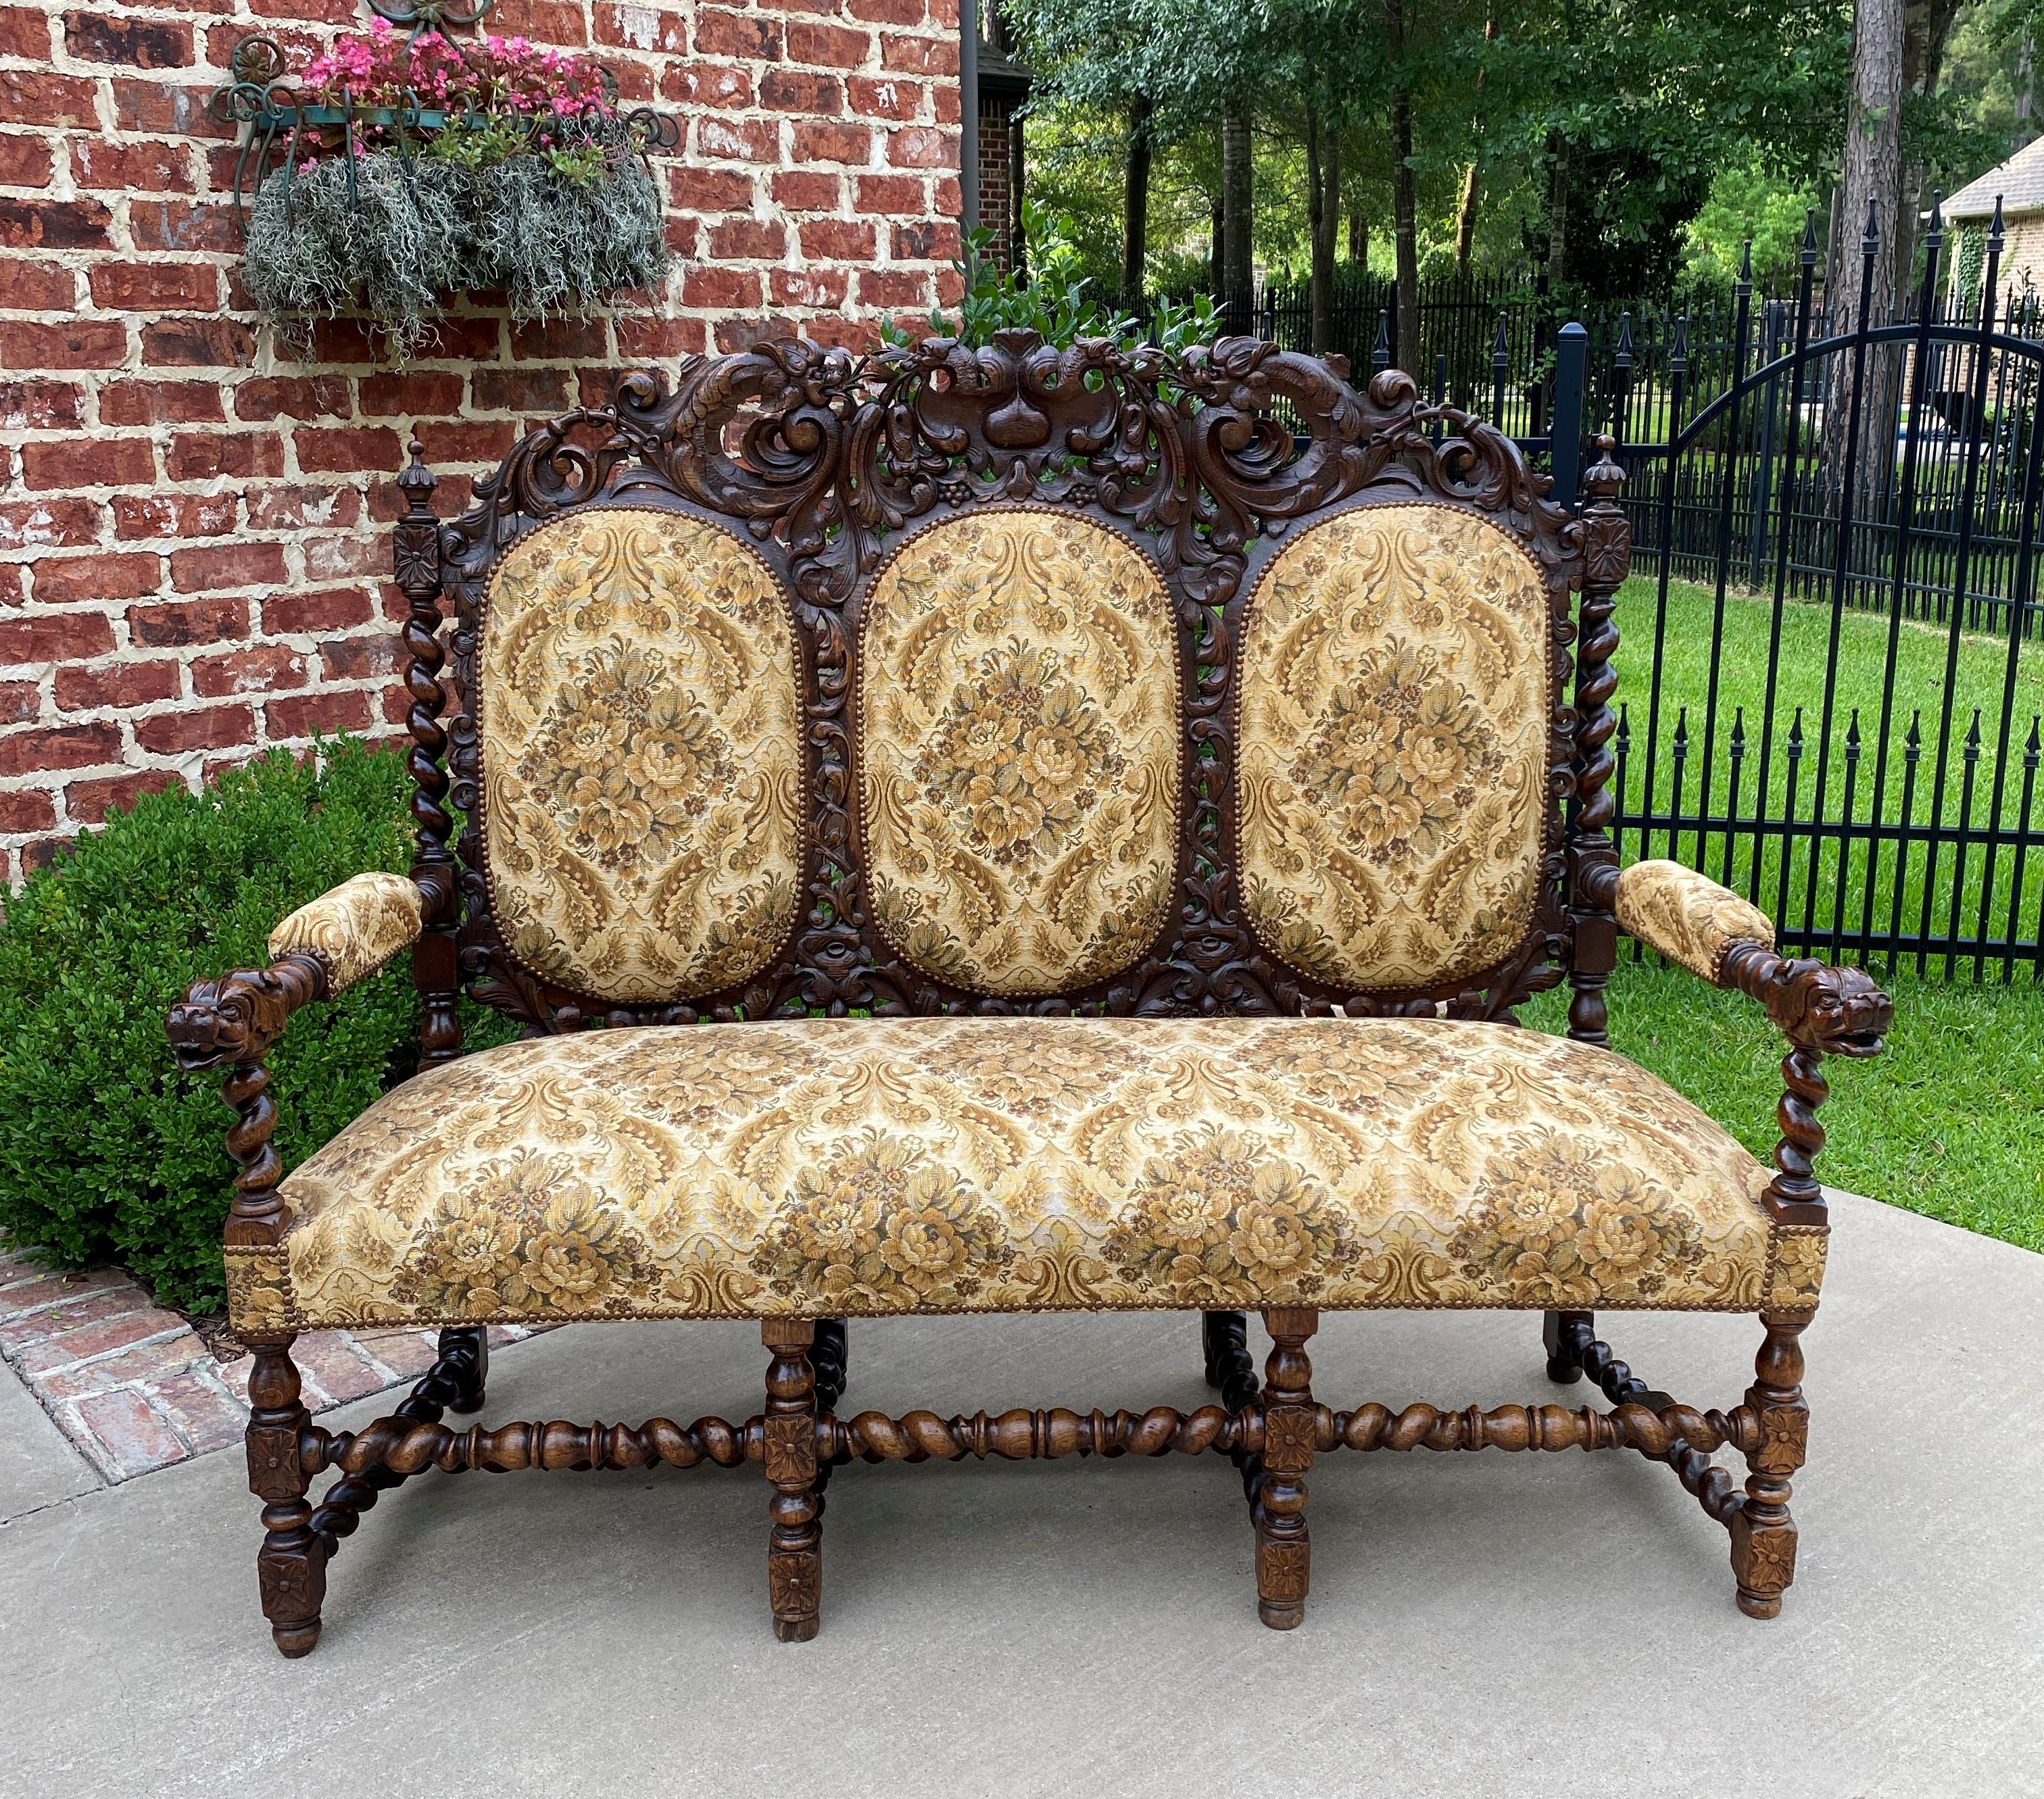 Upholstery Antique French Barley Twist Sofa Settee Bench Loveseat Oak Dogs Upholstered